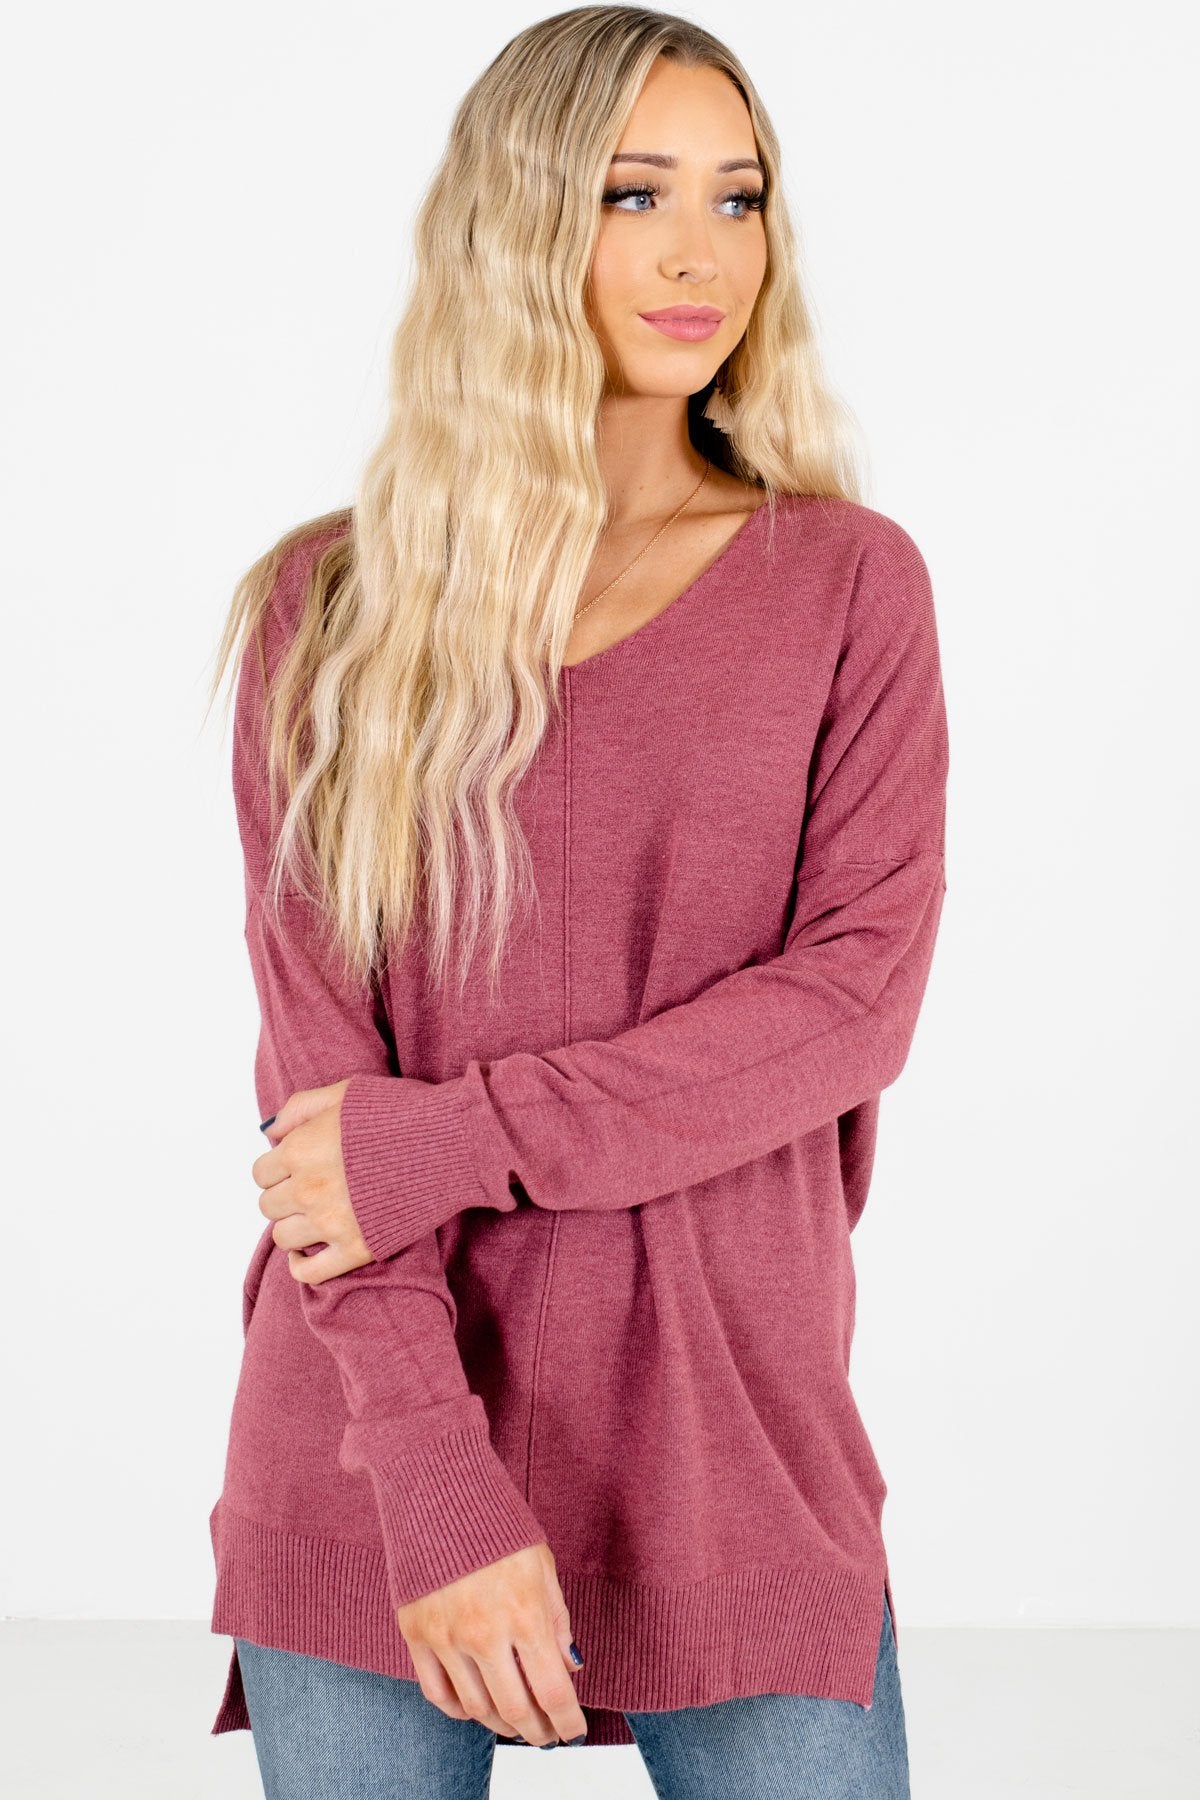 Women's Purple Warm and Cozy Boutique Clothing